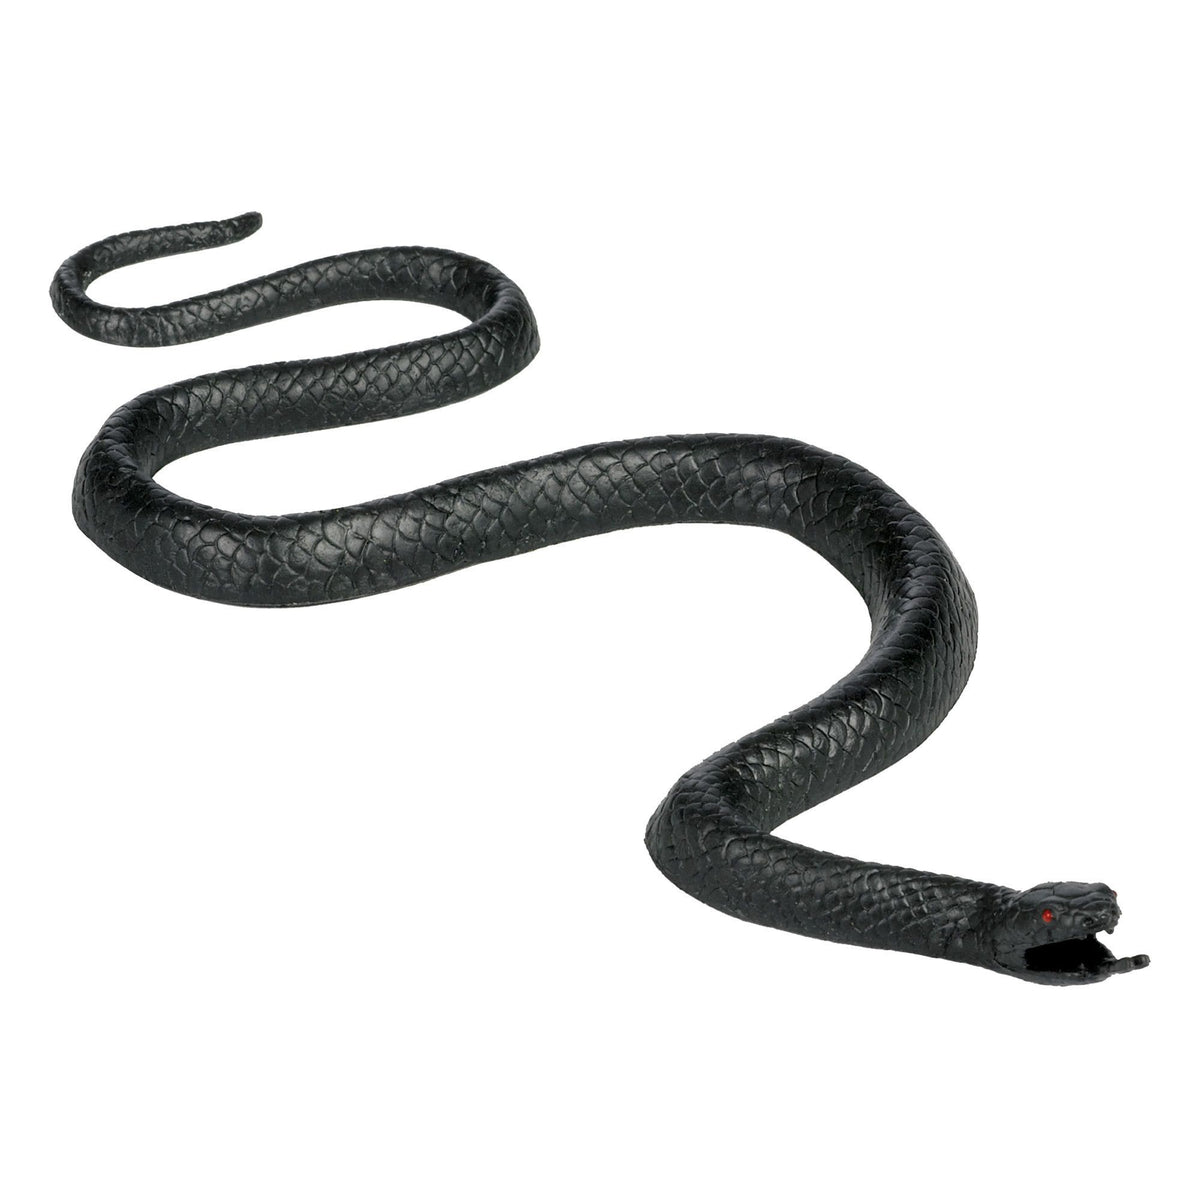 Small snake Party Favor/Decoration  9 1/2 inches  x 10 inches